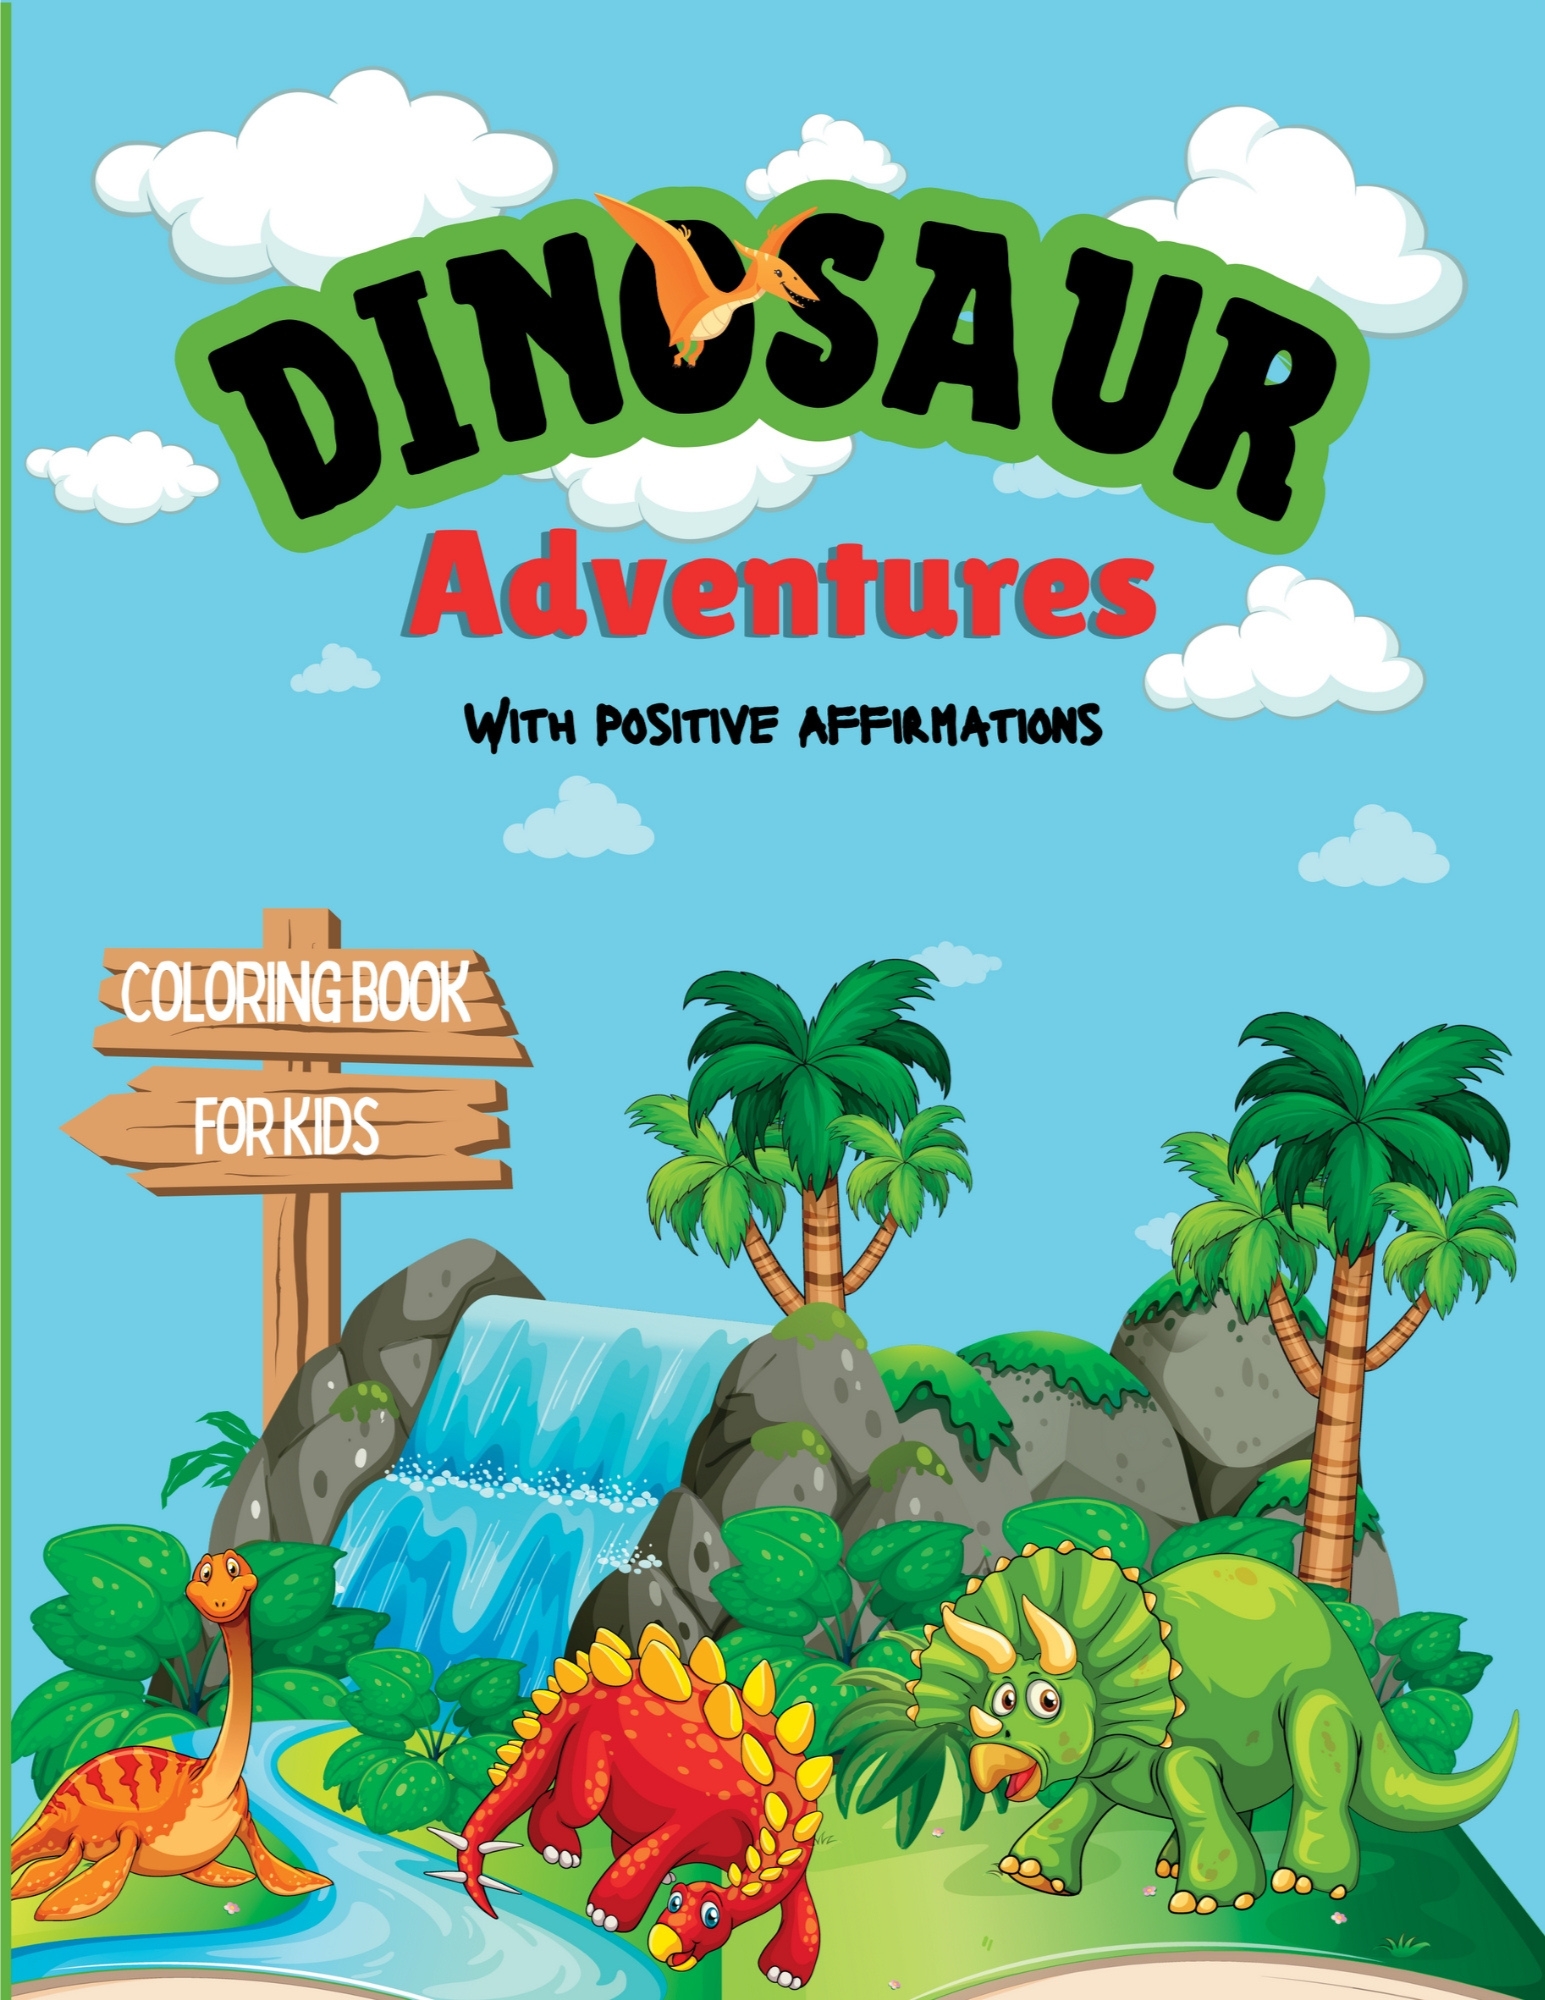 Dinosaur-Adventure-with-positive-affirmations-coloring-book-for-kids.jpg